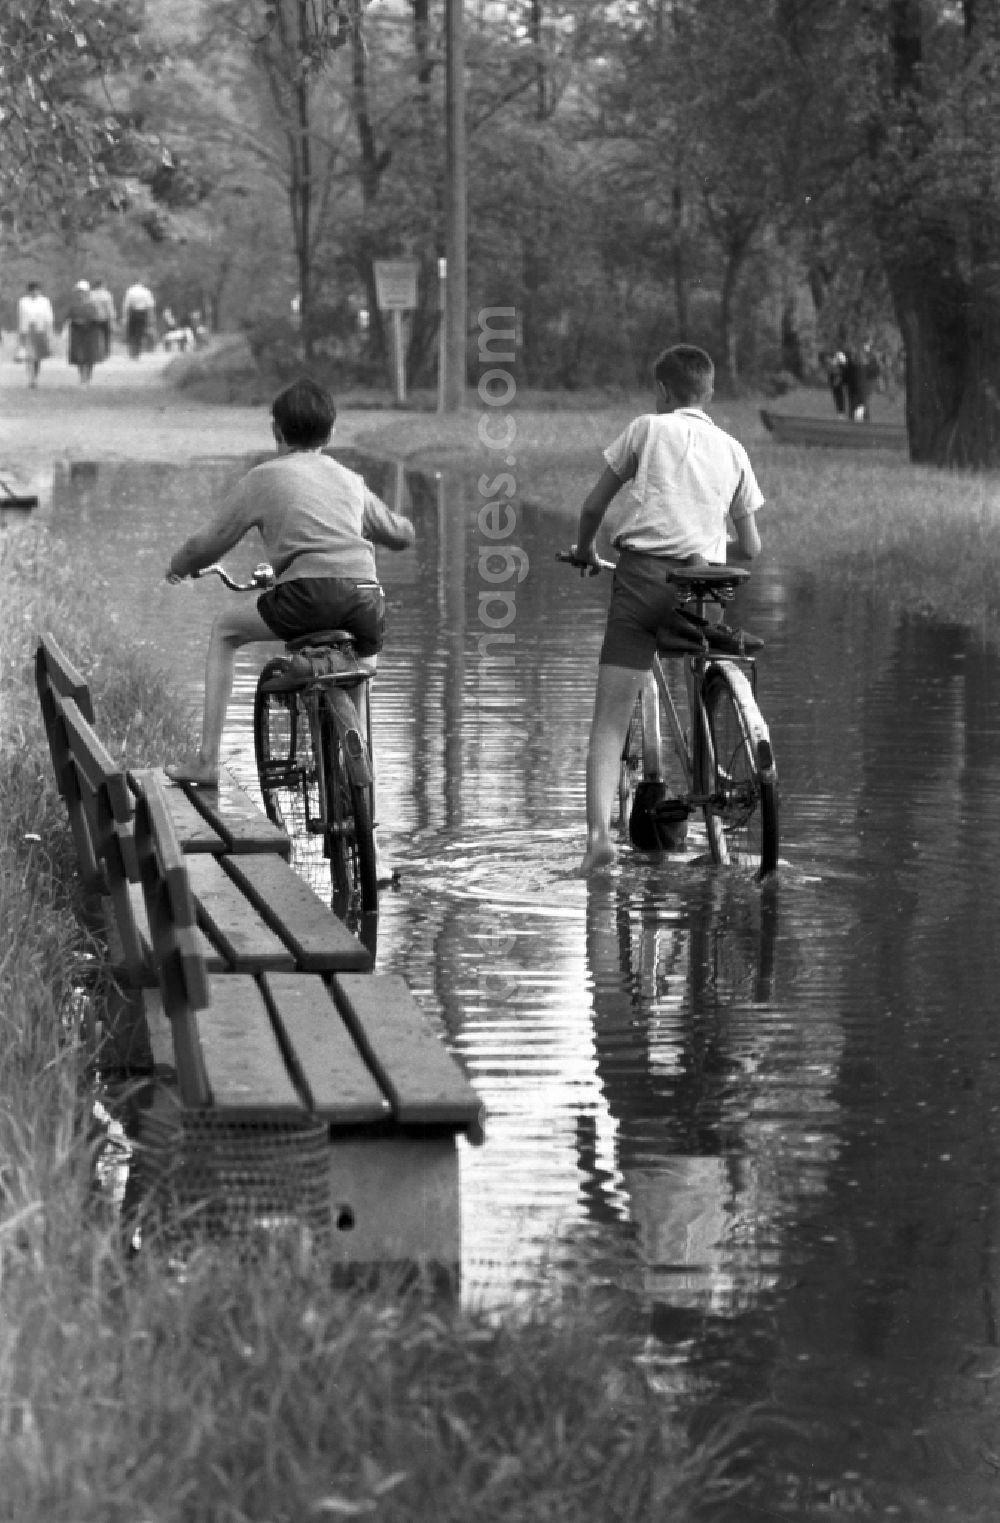 GDR picture archive: Dessau - 2 boys ride their bikes through a large puddle in the city park in Dessau in Saxony - Anhalt